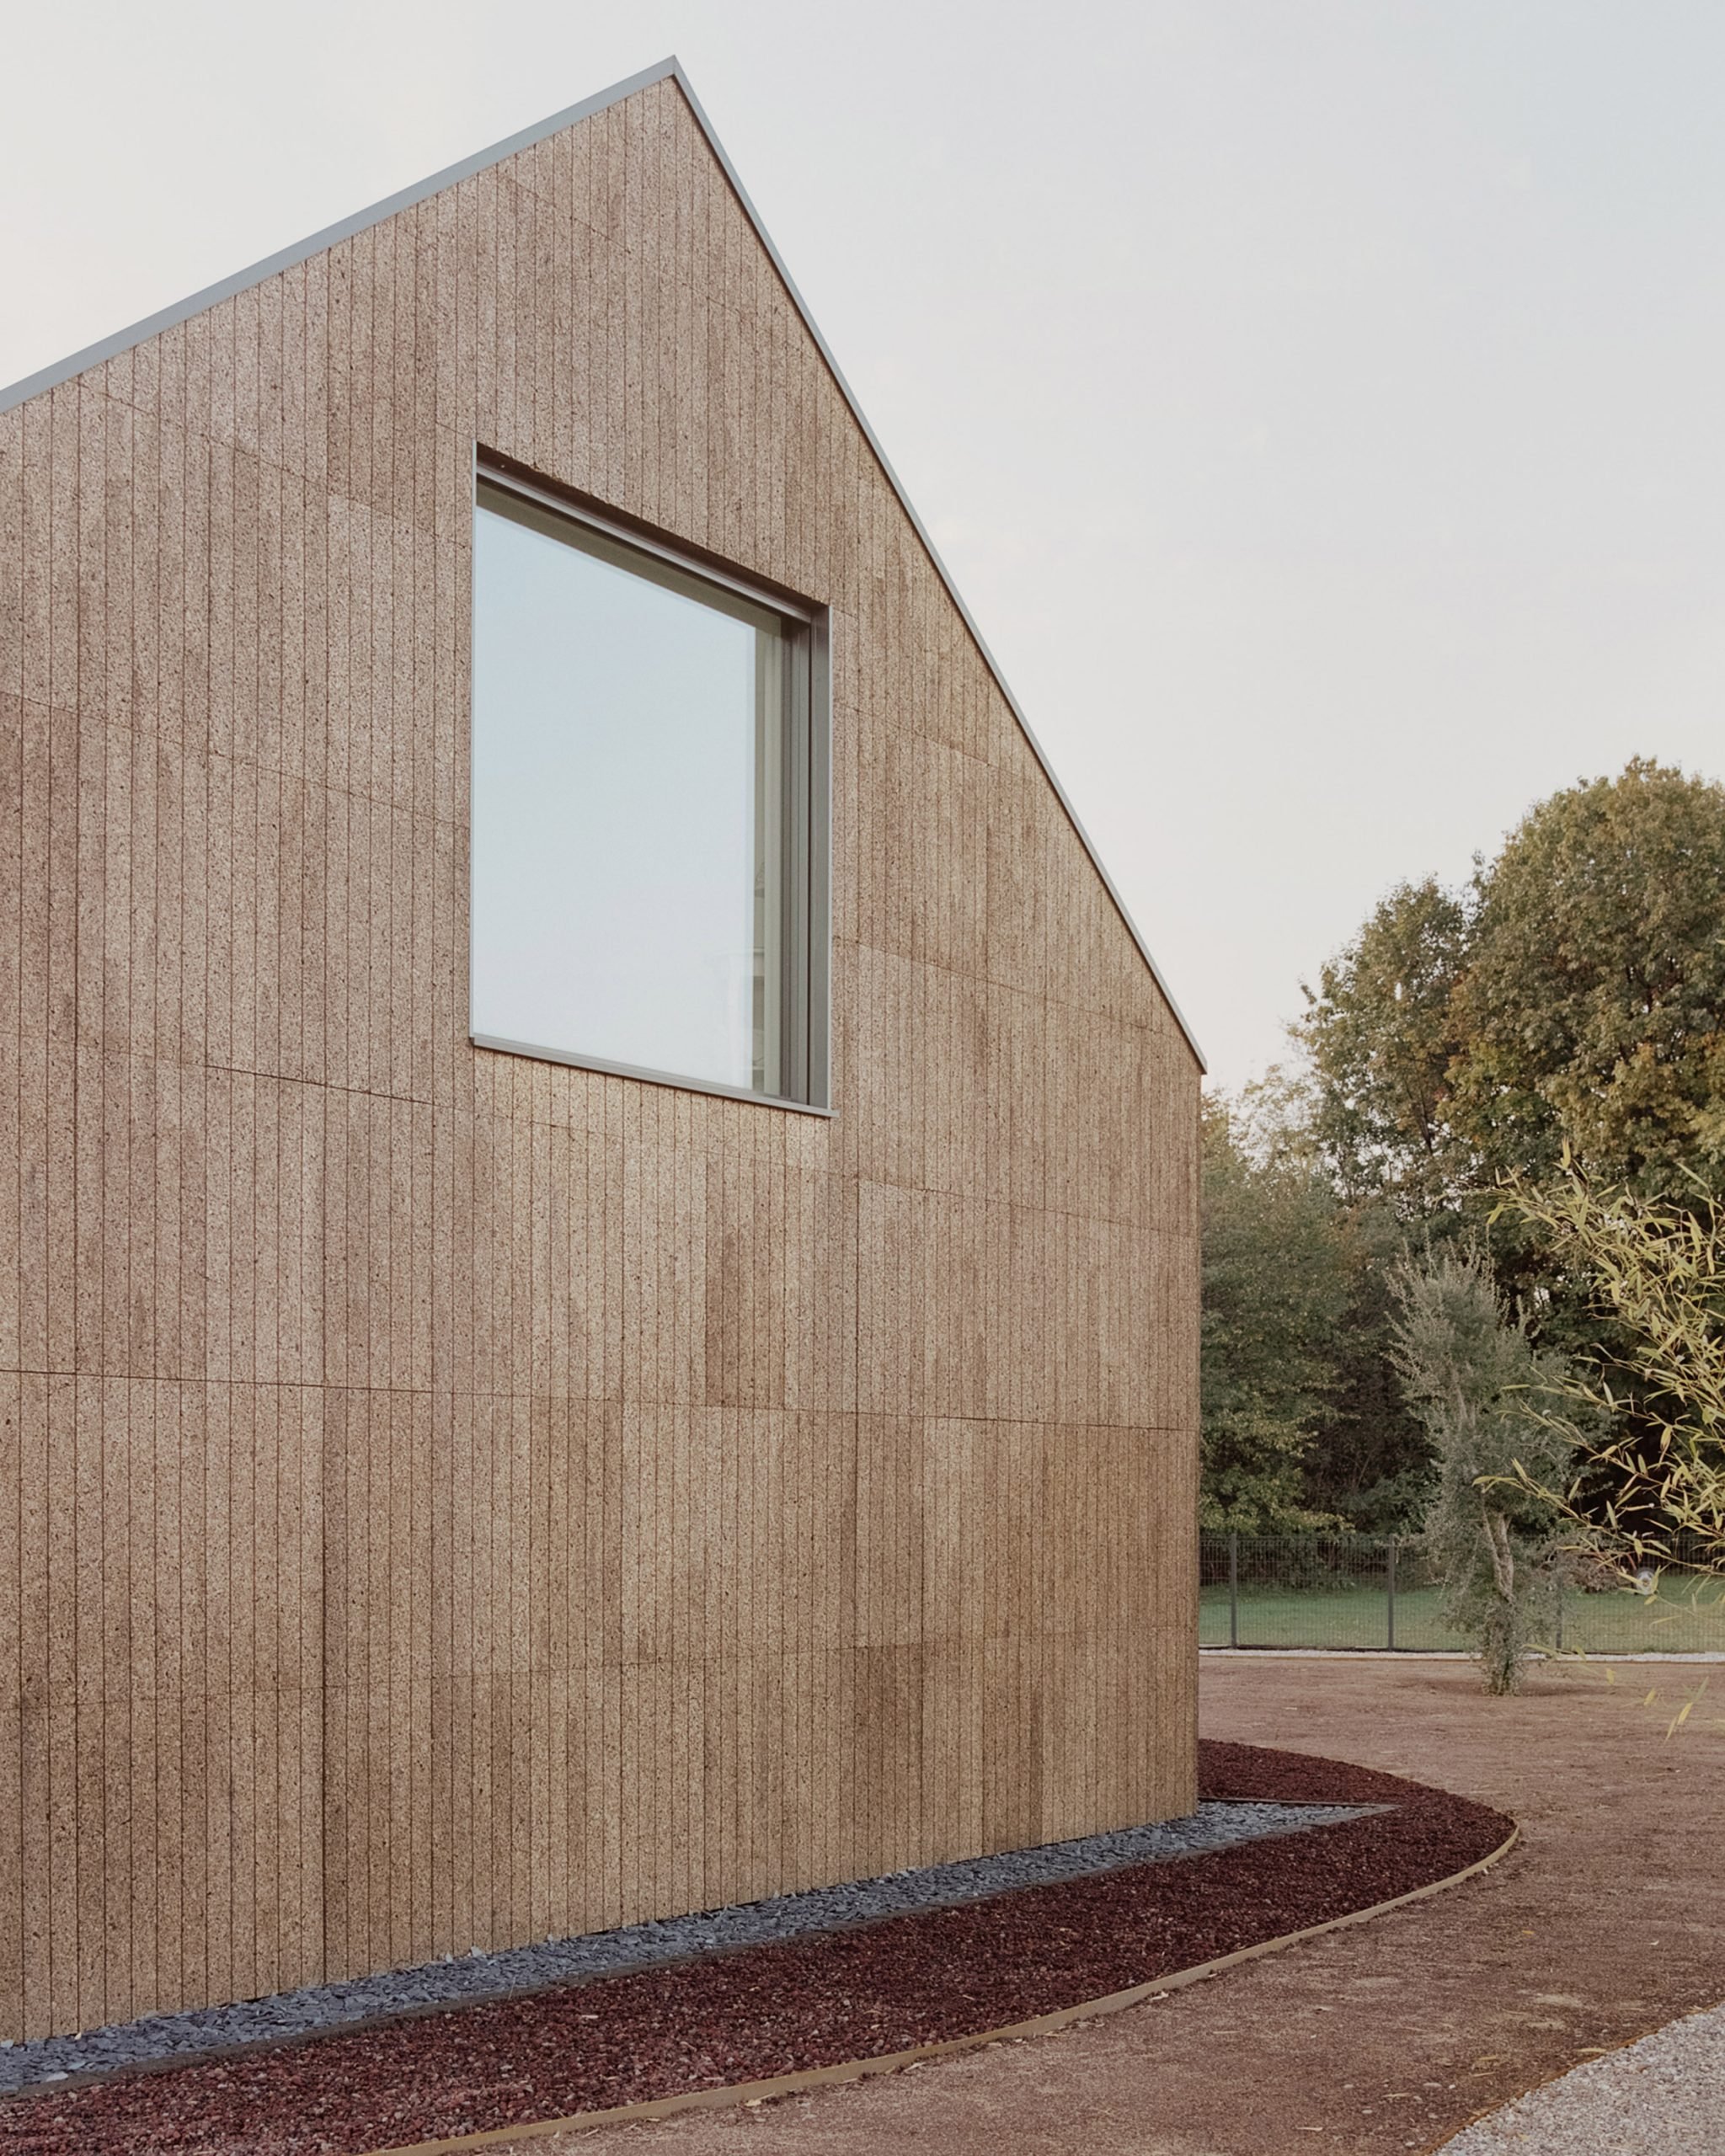 The cork cladding of The House of Wood, Straw and Cork by LCA Architetti